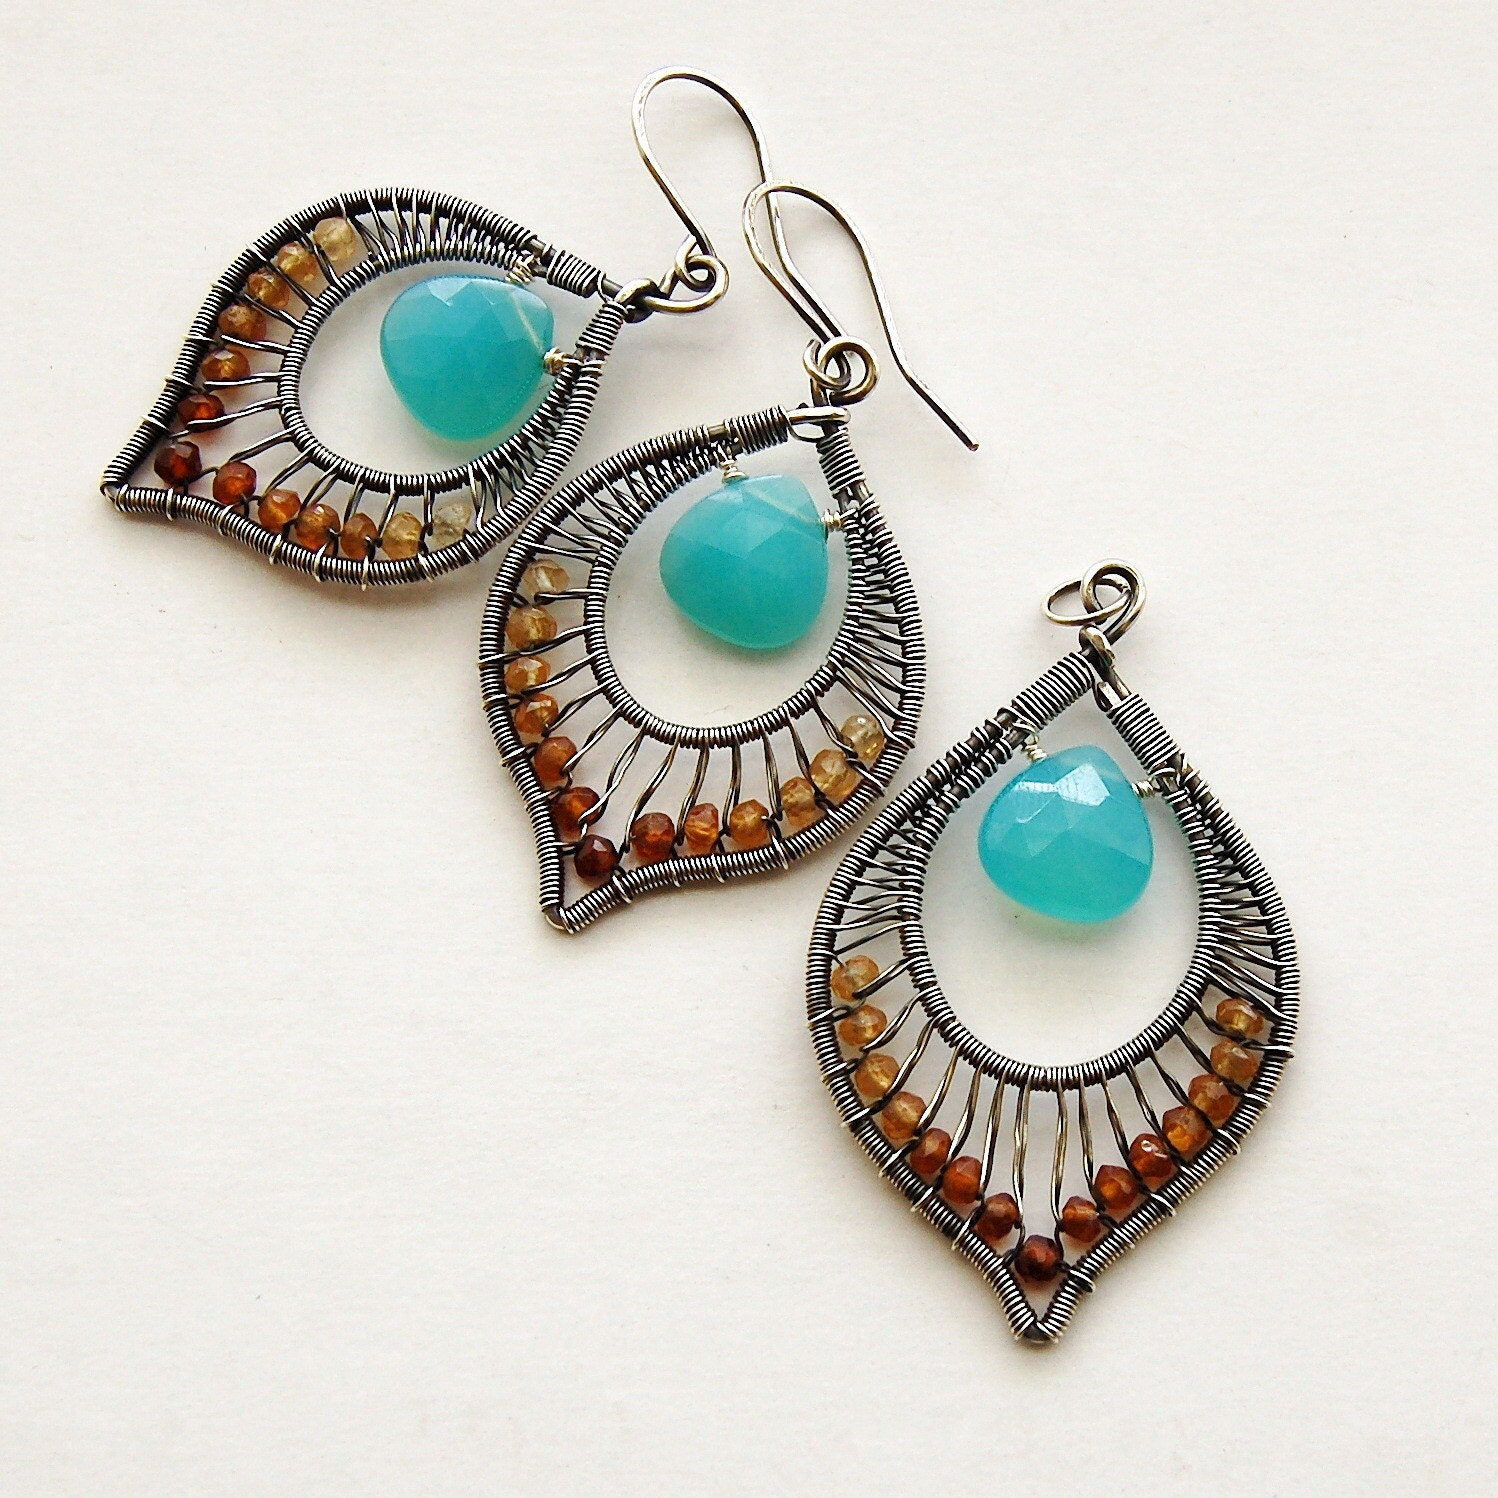 AAA Peruvian Blue Chalcedony and Hessonite Garnet Wire Wrapped Earrings and Pendant Set in Silver